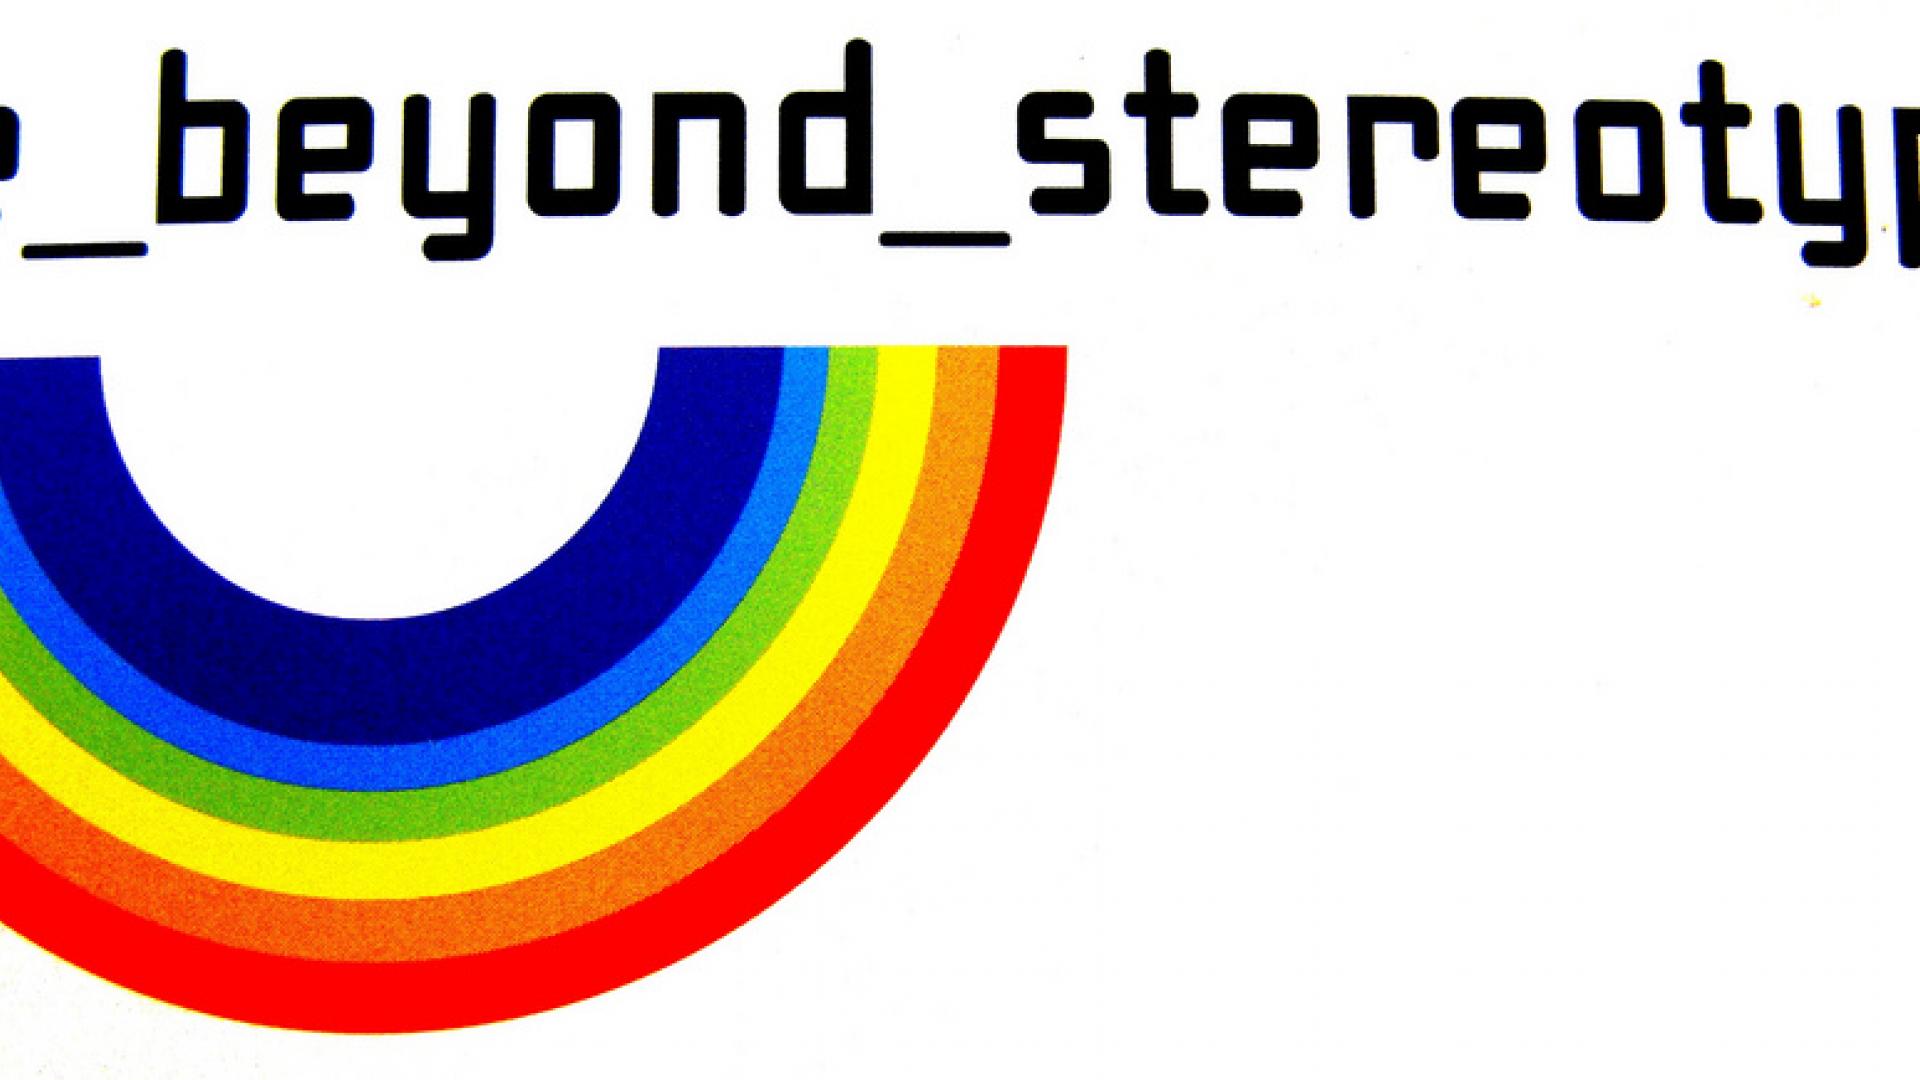 Image of upside down rainbow with the text reading 'life beyond stereotypes'